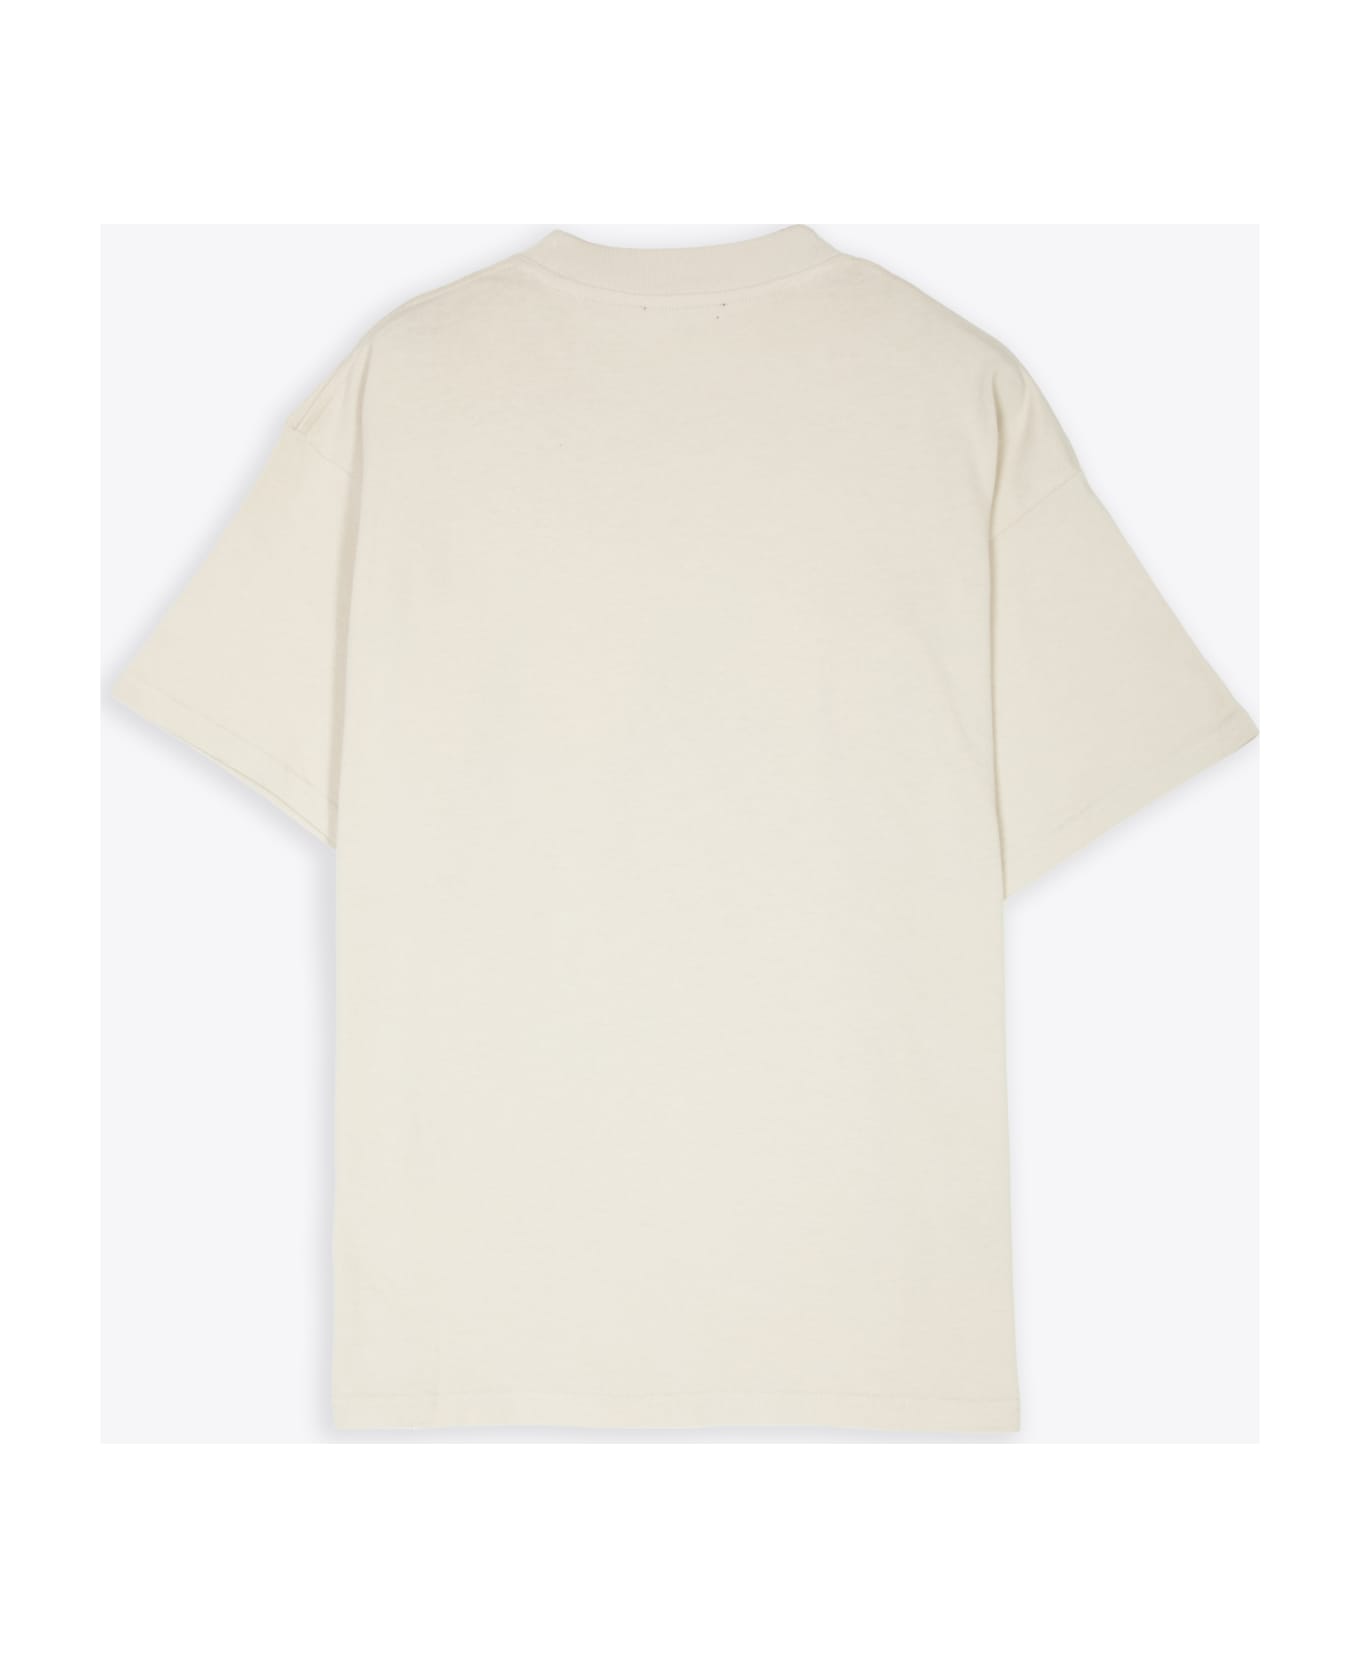 REPRESENT Horoughbred T-shirt Off white t-shirt with graphic print - Horoughbred T-shirt - Crema